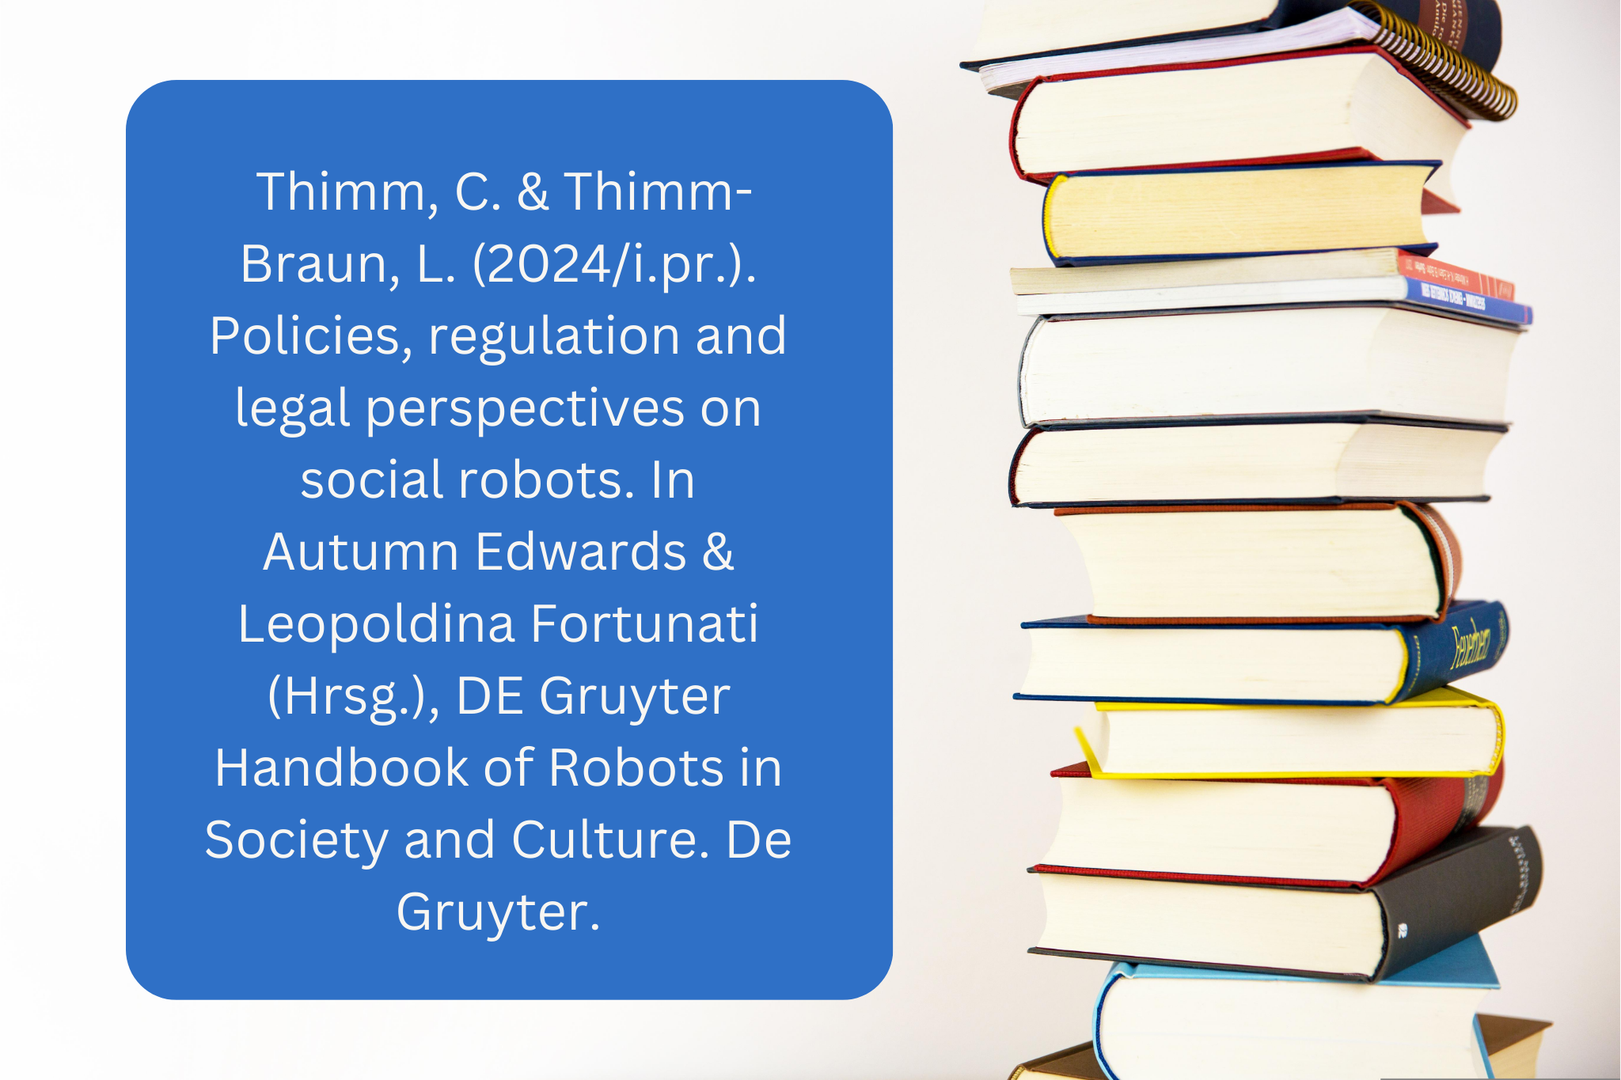 Thimm, C. & Thimm-Braun, L. (2024i.pr.). Policies, regulation and legal perspectives on social robots. In Autumn Edwards & Leopoldina Fortunati (Hrsg.), DE Gruyter Handbook of Robots in Society and Culture. De Gruyter.